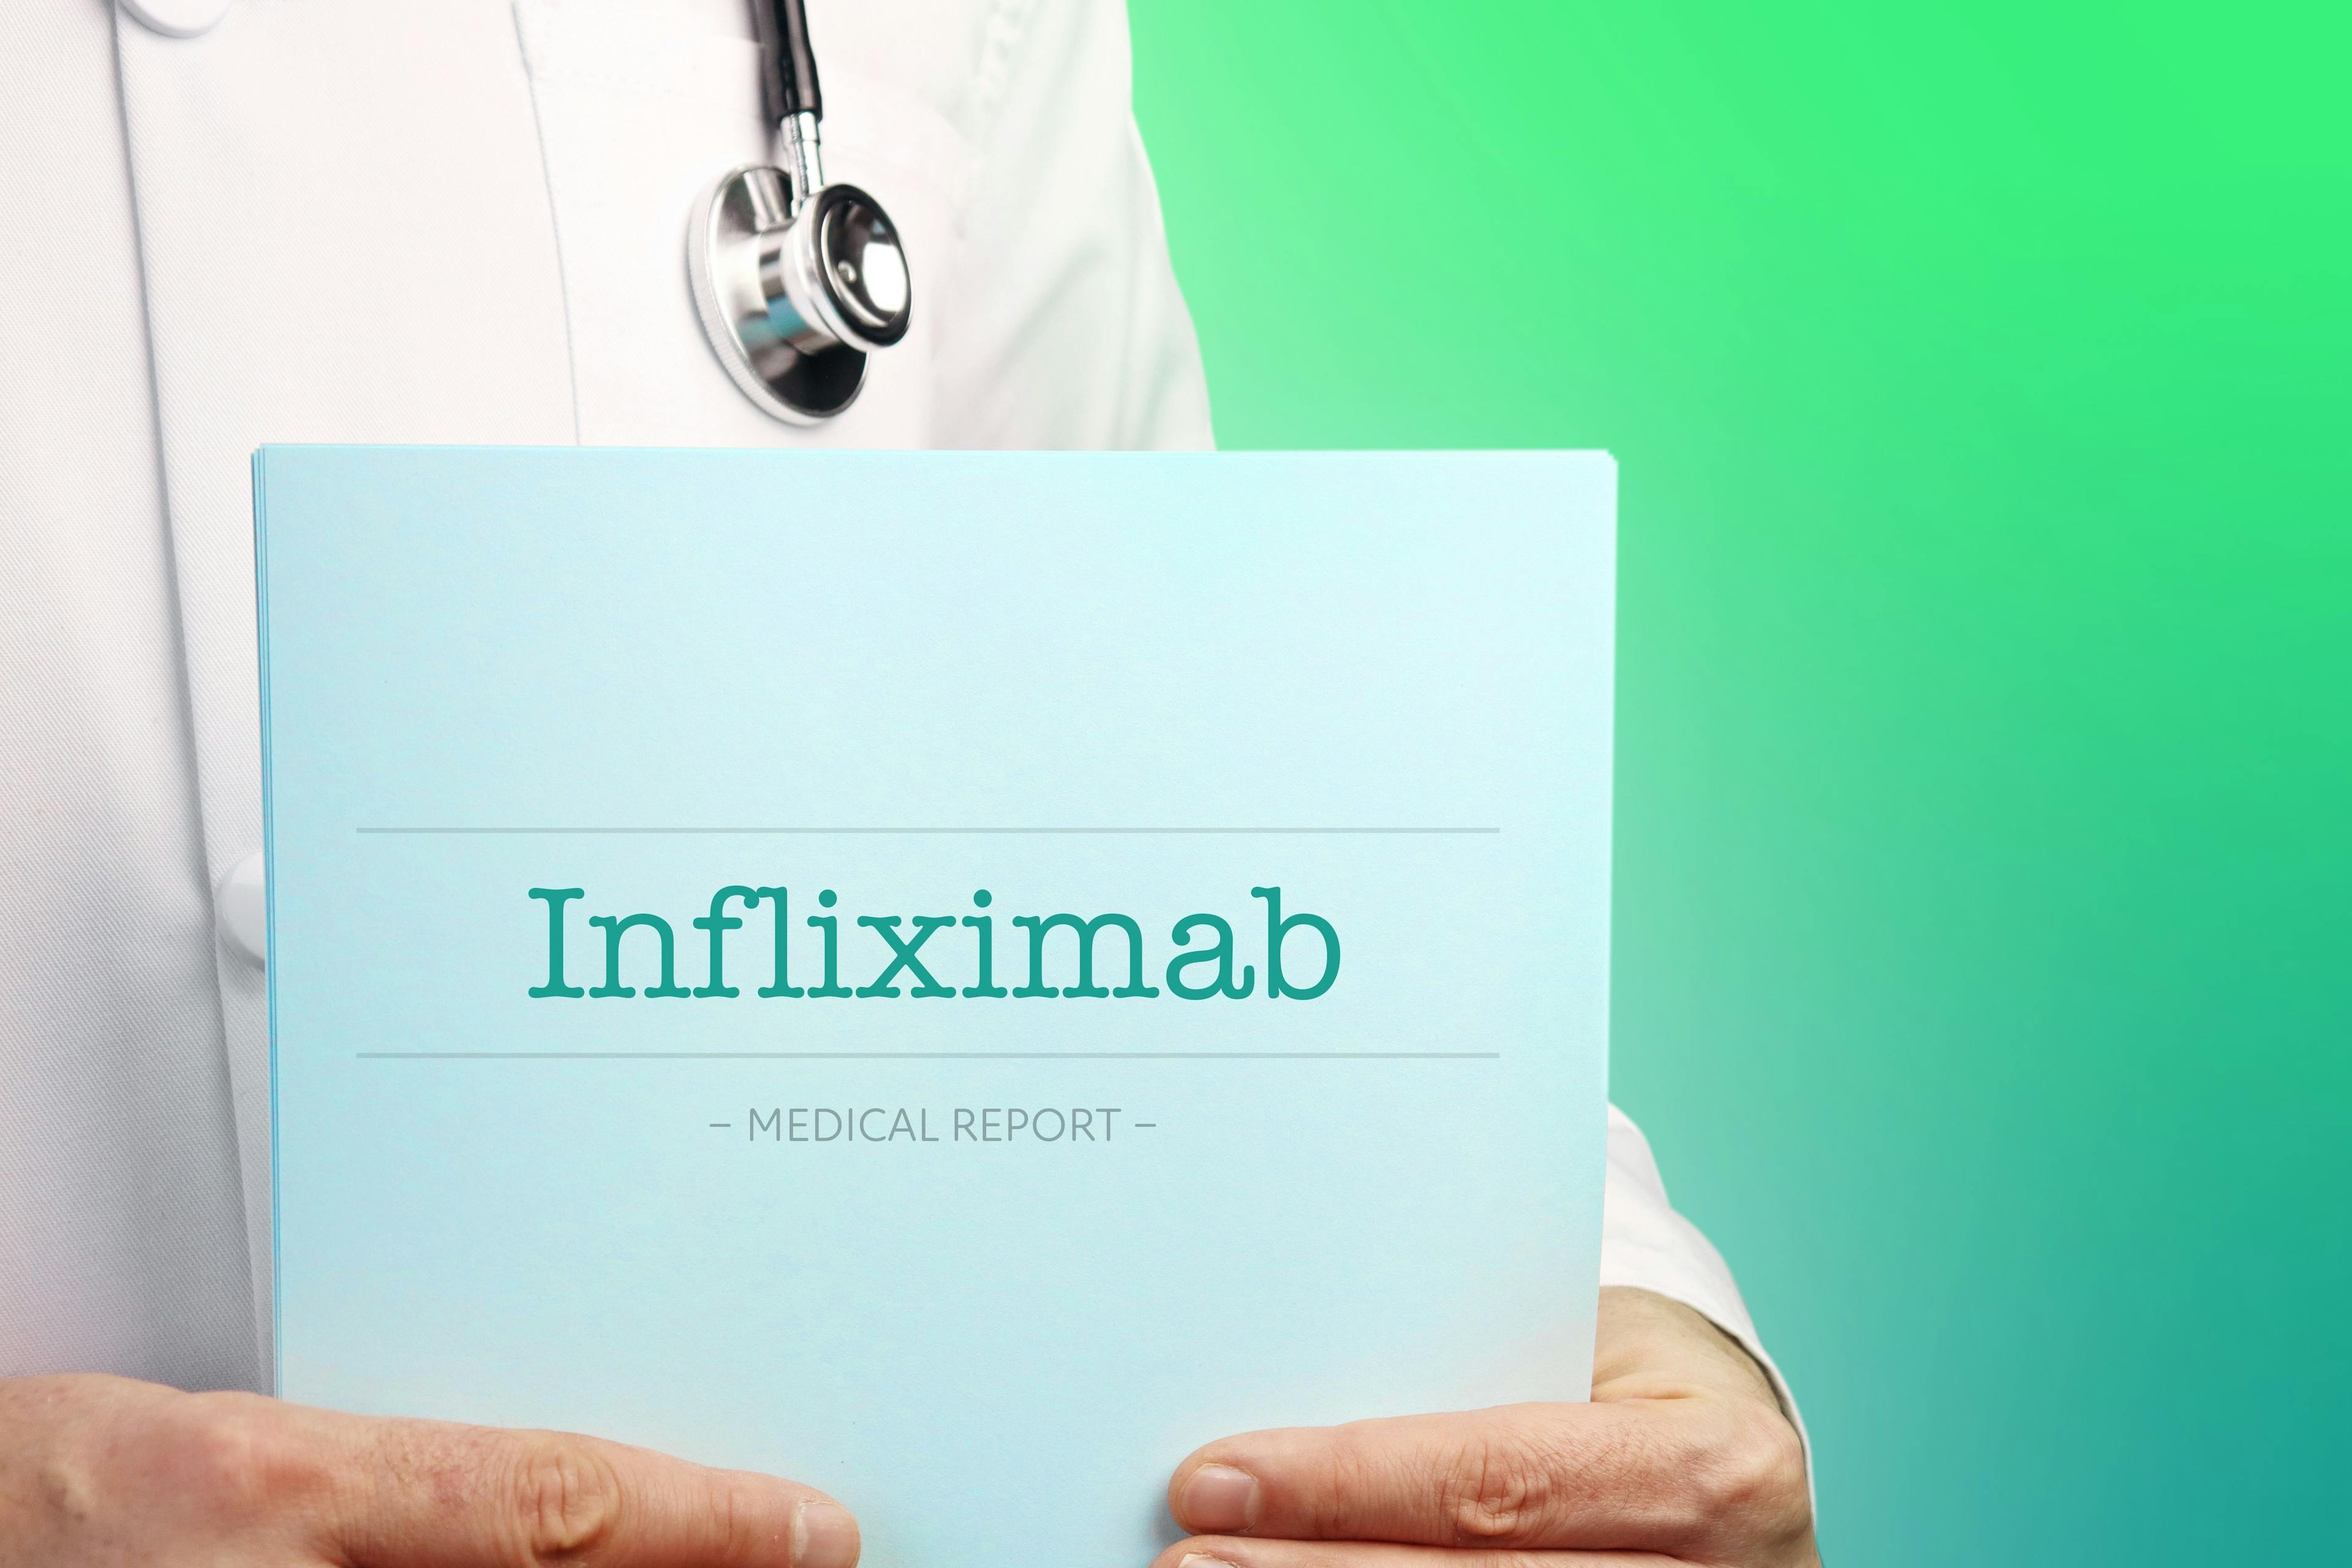 Doctor hold sign that says infliximab | Image credit: @ MA-Illustrations stock.adobe.com